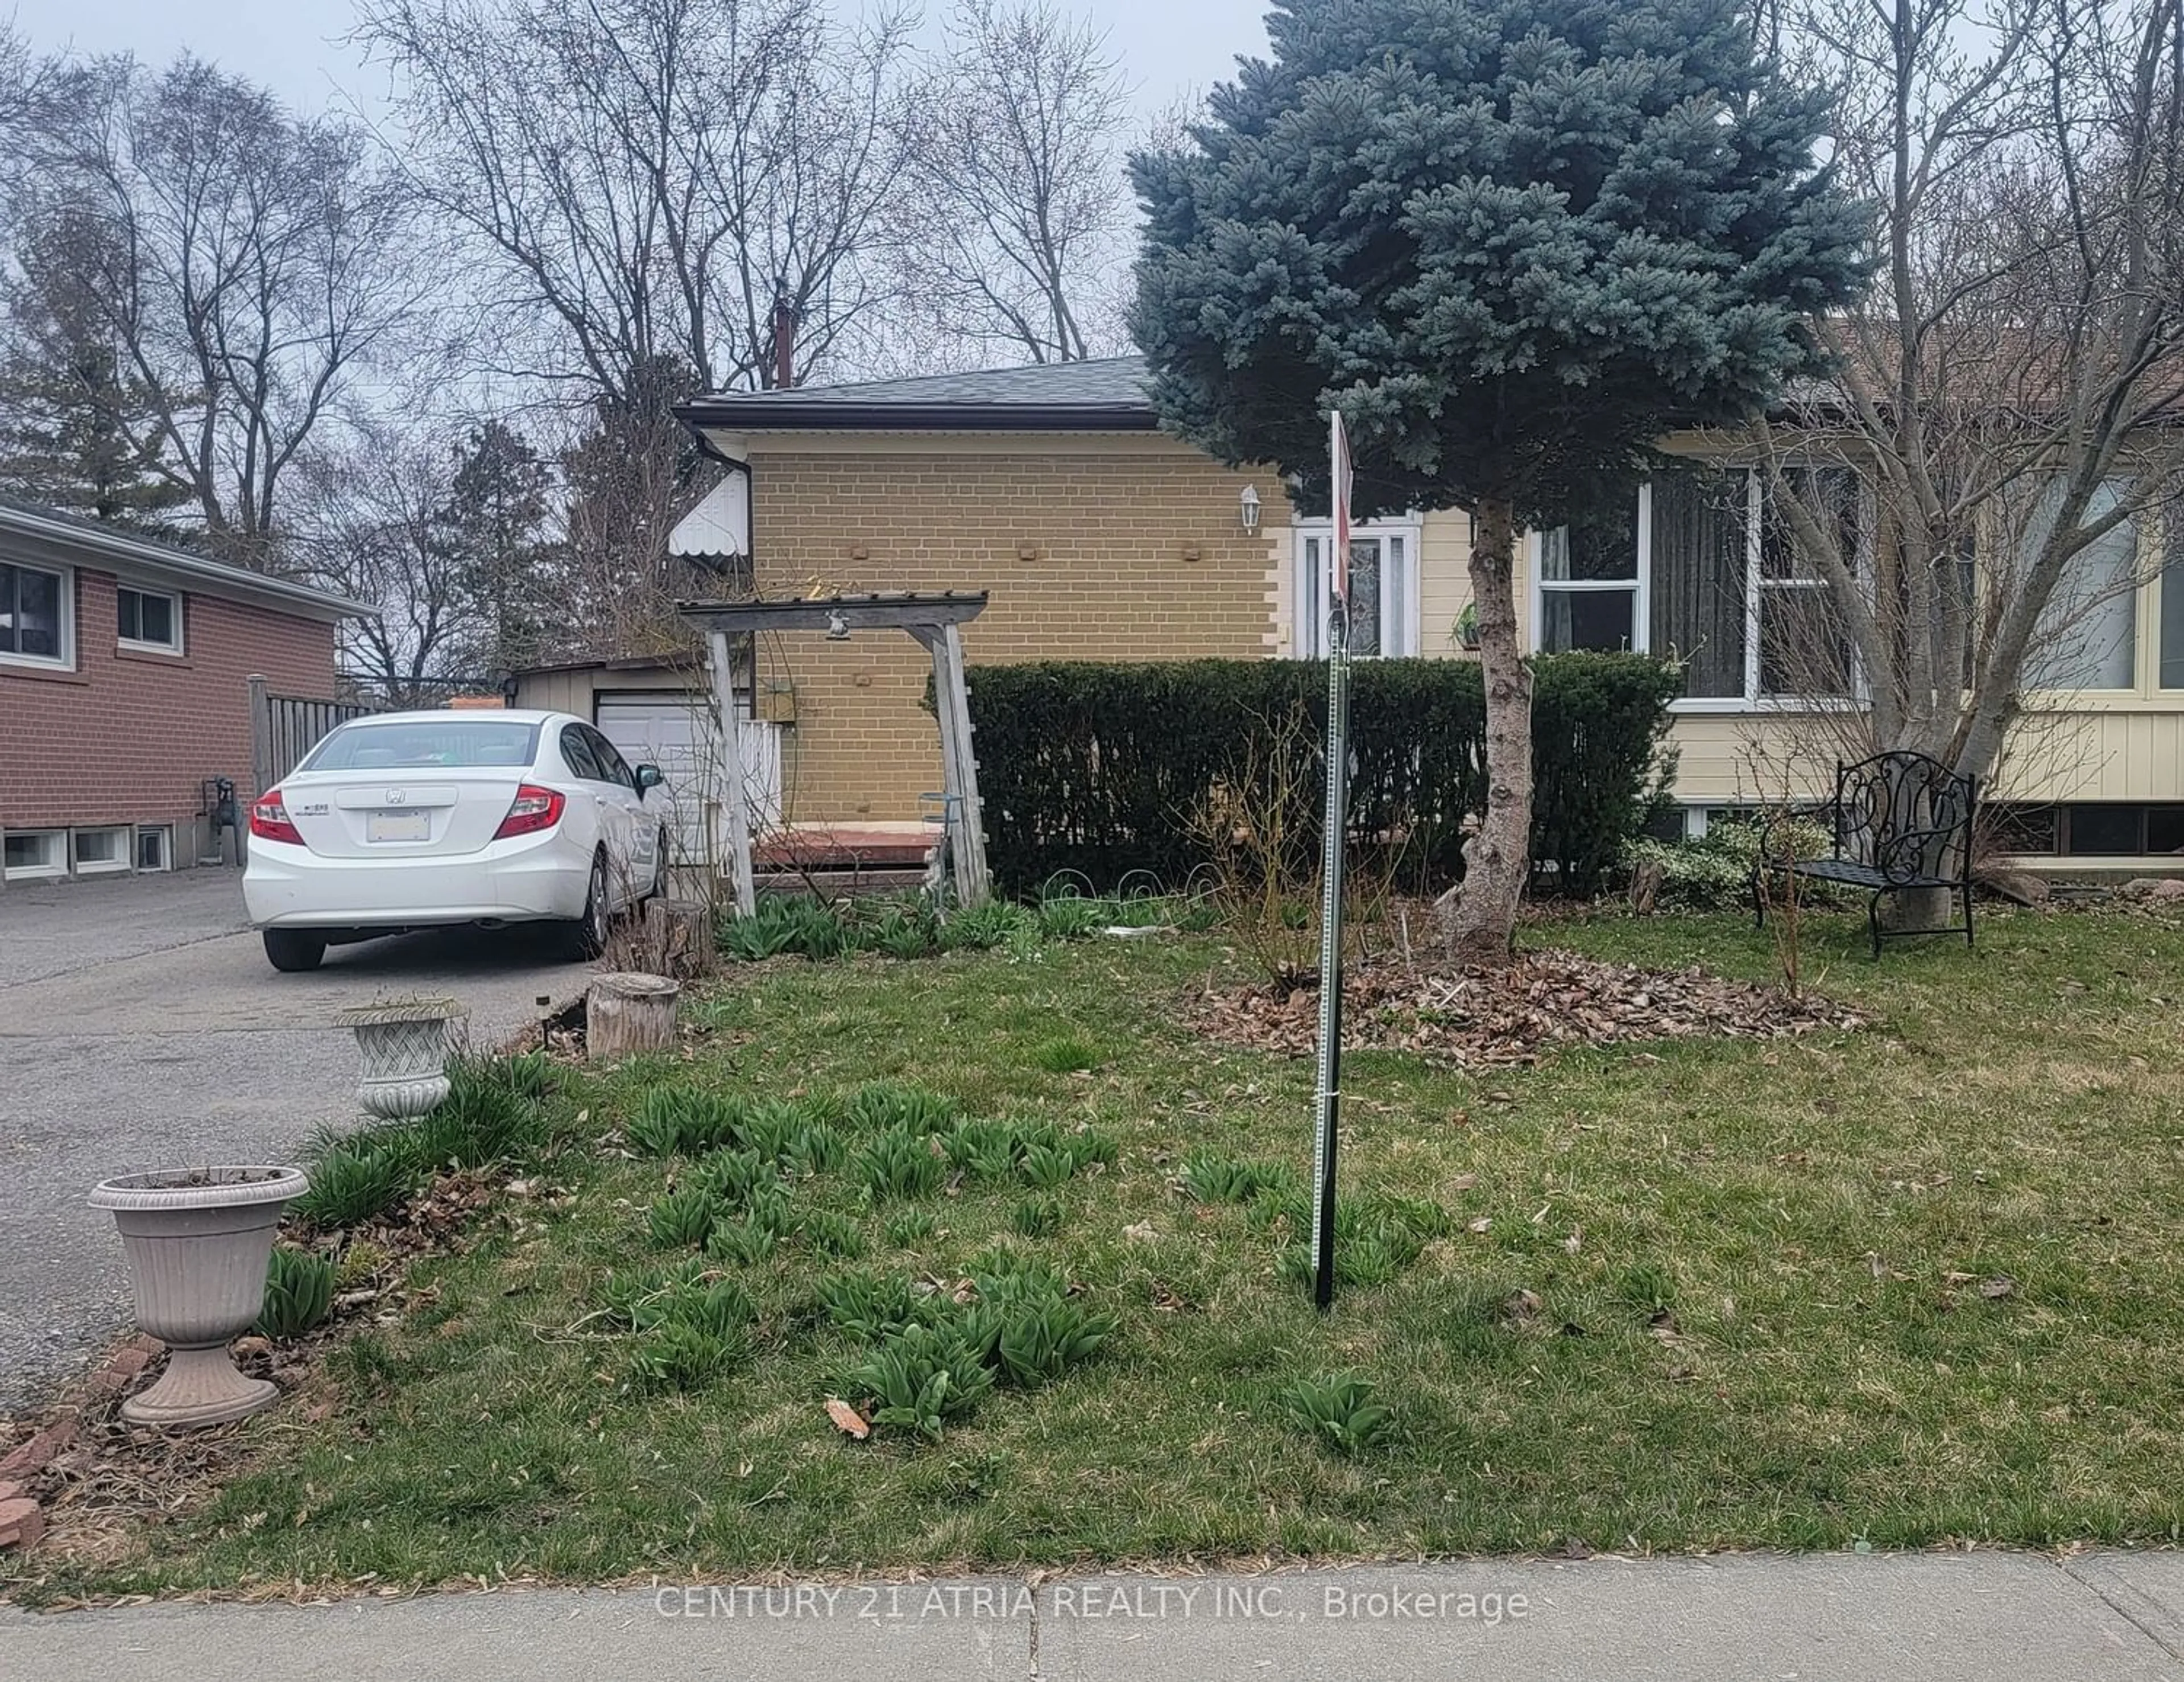 Frontside or backside of a home for 230 Axminster Dr, Richmond Hill Ontario L4C 2W1